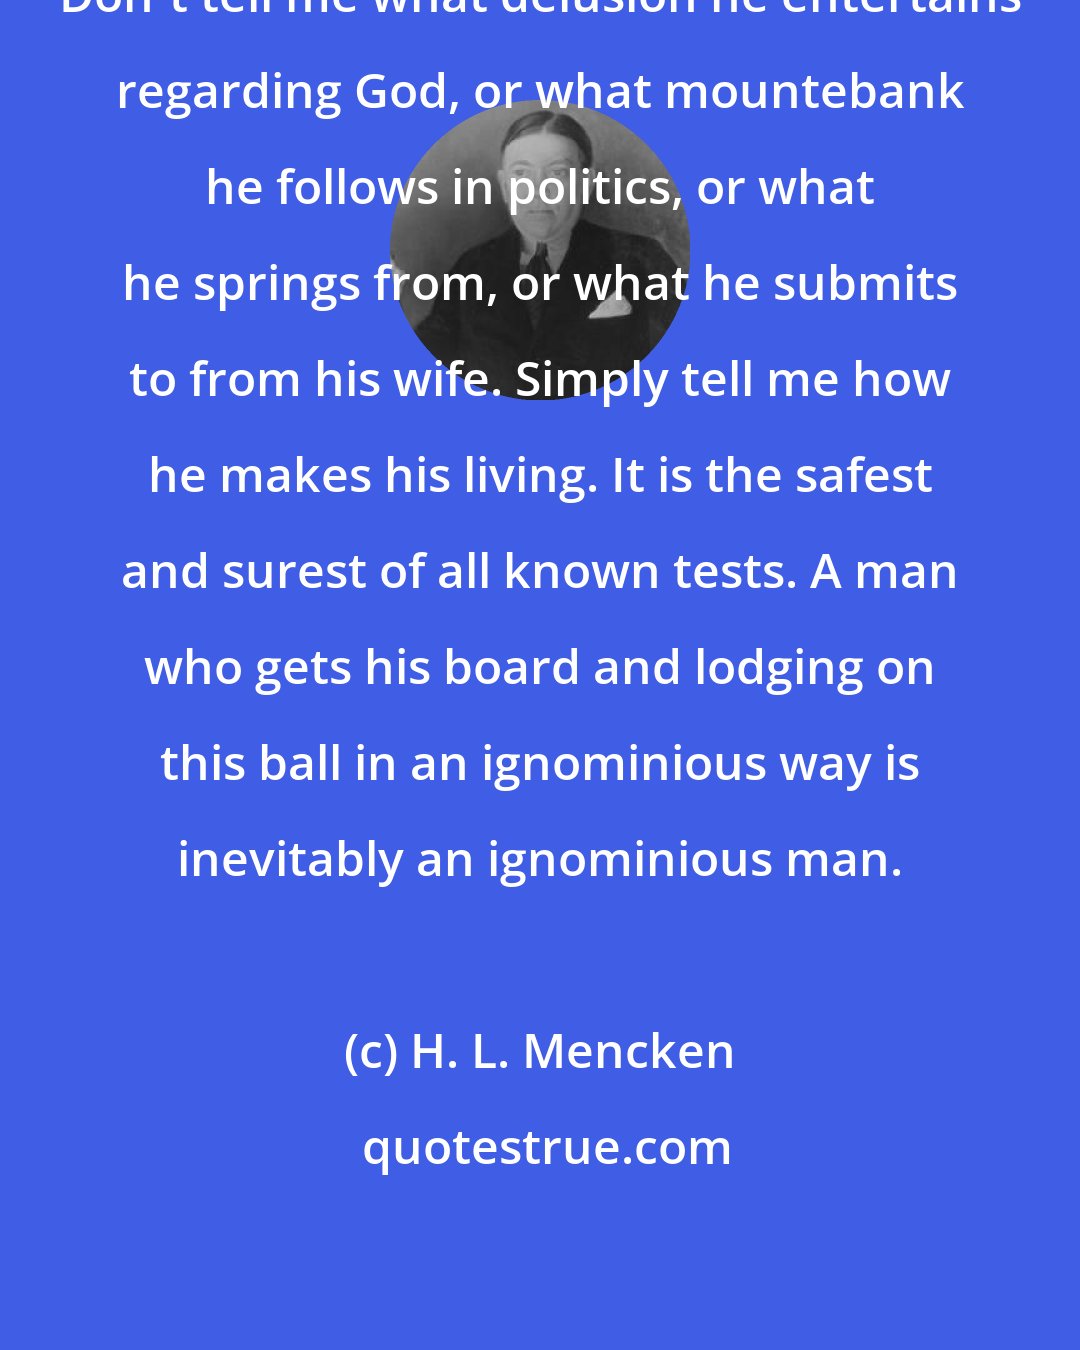 H. L. Mencken: Don't tell me what delusion he entertains regarding God, or what mountebank he follows in politics, or what he springs from, or what he submits to from his wife. Simply tell me how he makes his living. It is the safest and surest of all known tests. A man who gets his board and lodging on this ball in an ignominious way is inevitably an ignominious man.